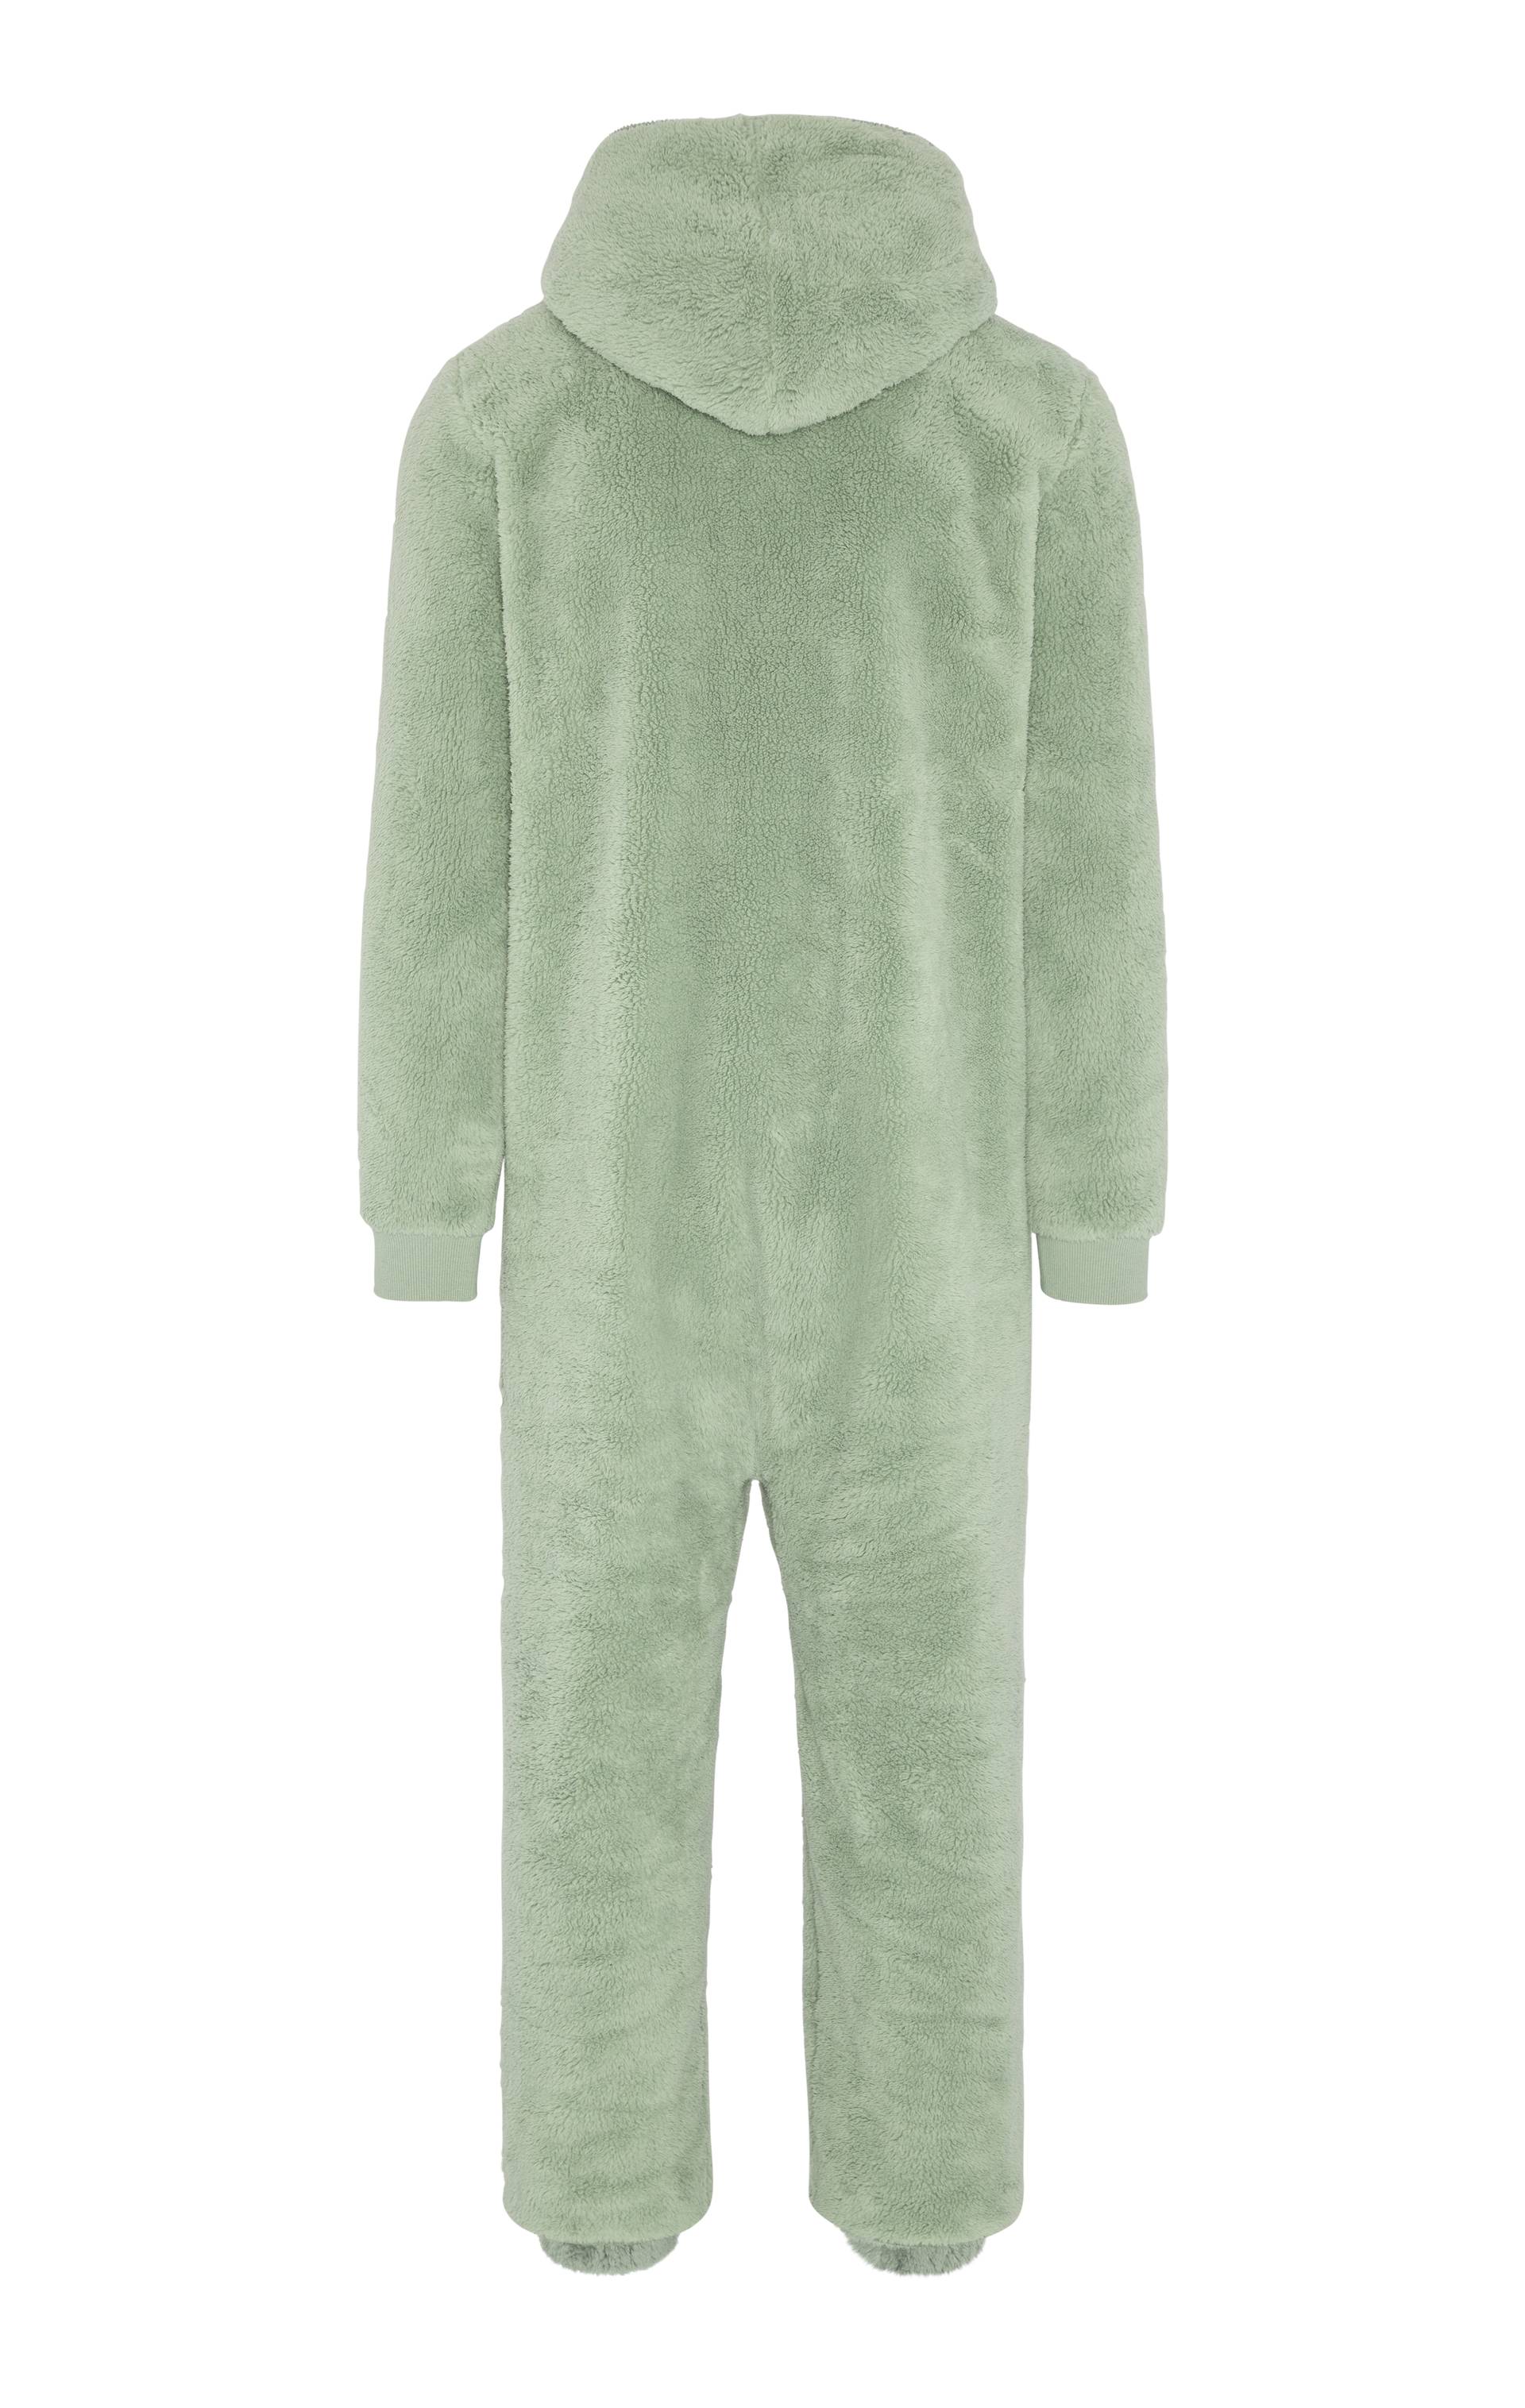 Onepiece The Puppy Jumpsuit Green - 2